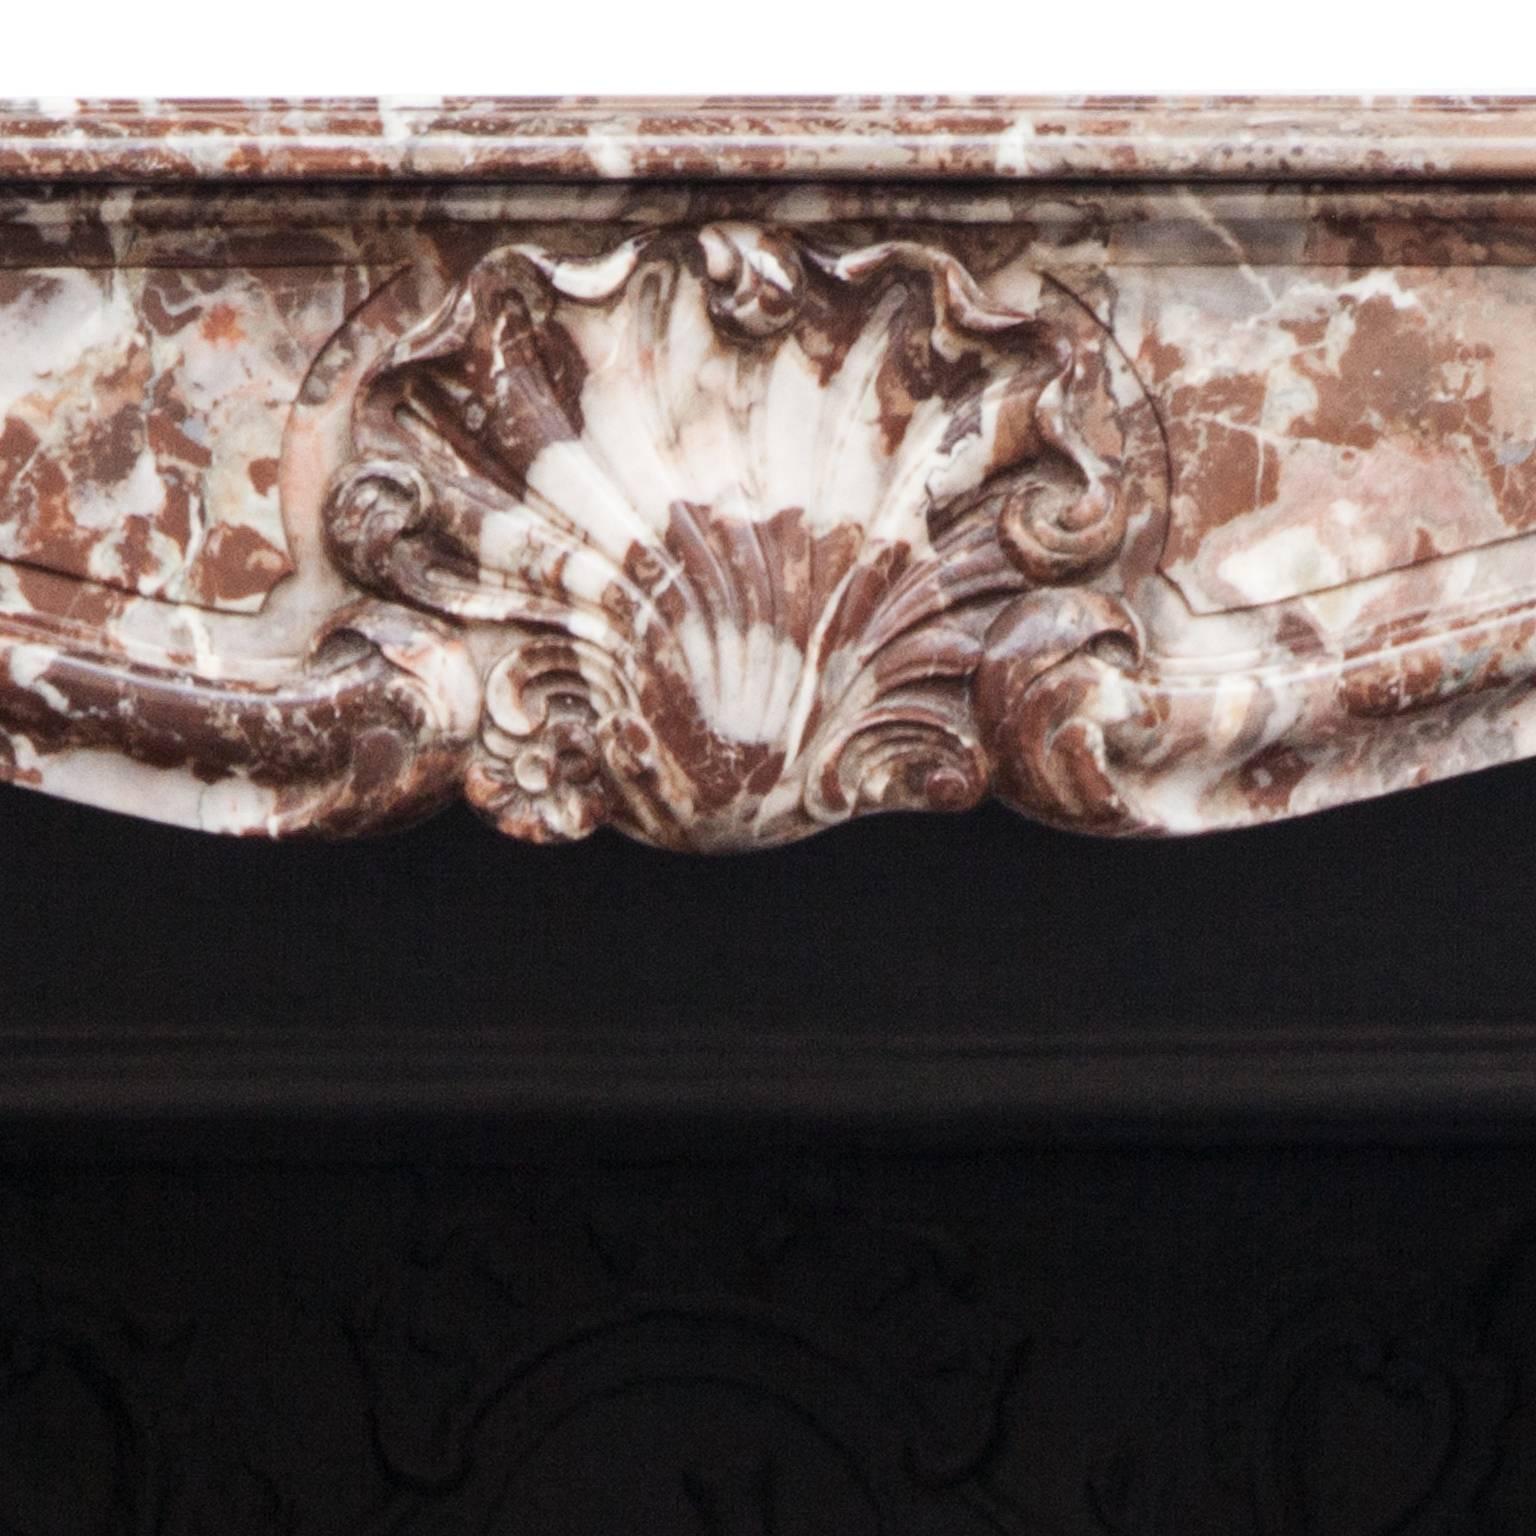 Hand-Carved 19th Century Louis XV Style Parisian Marble Fireplace Mantelpiece and Interior